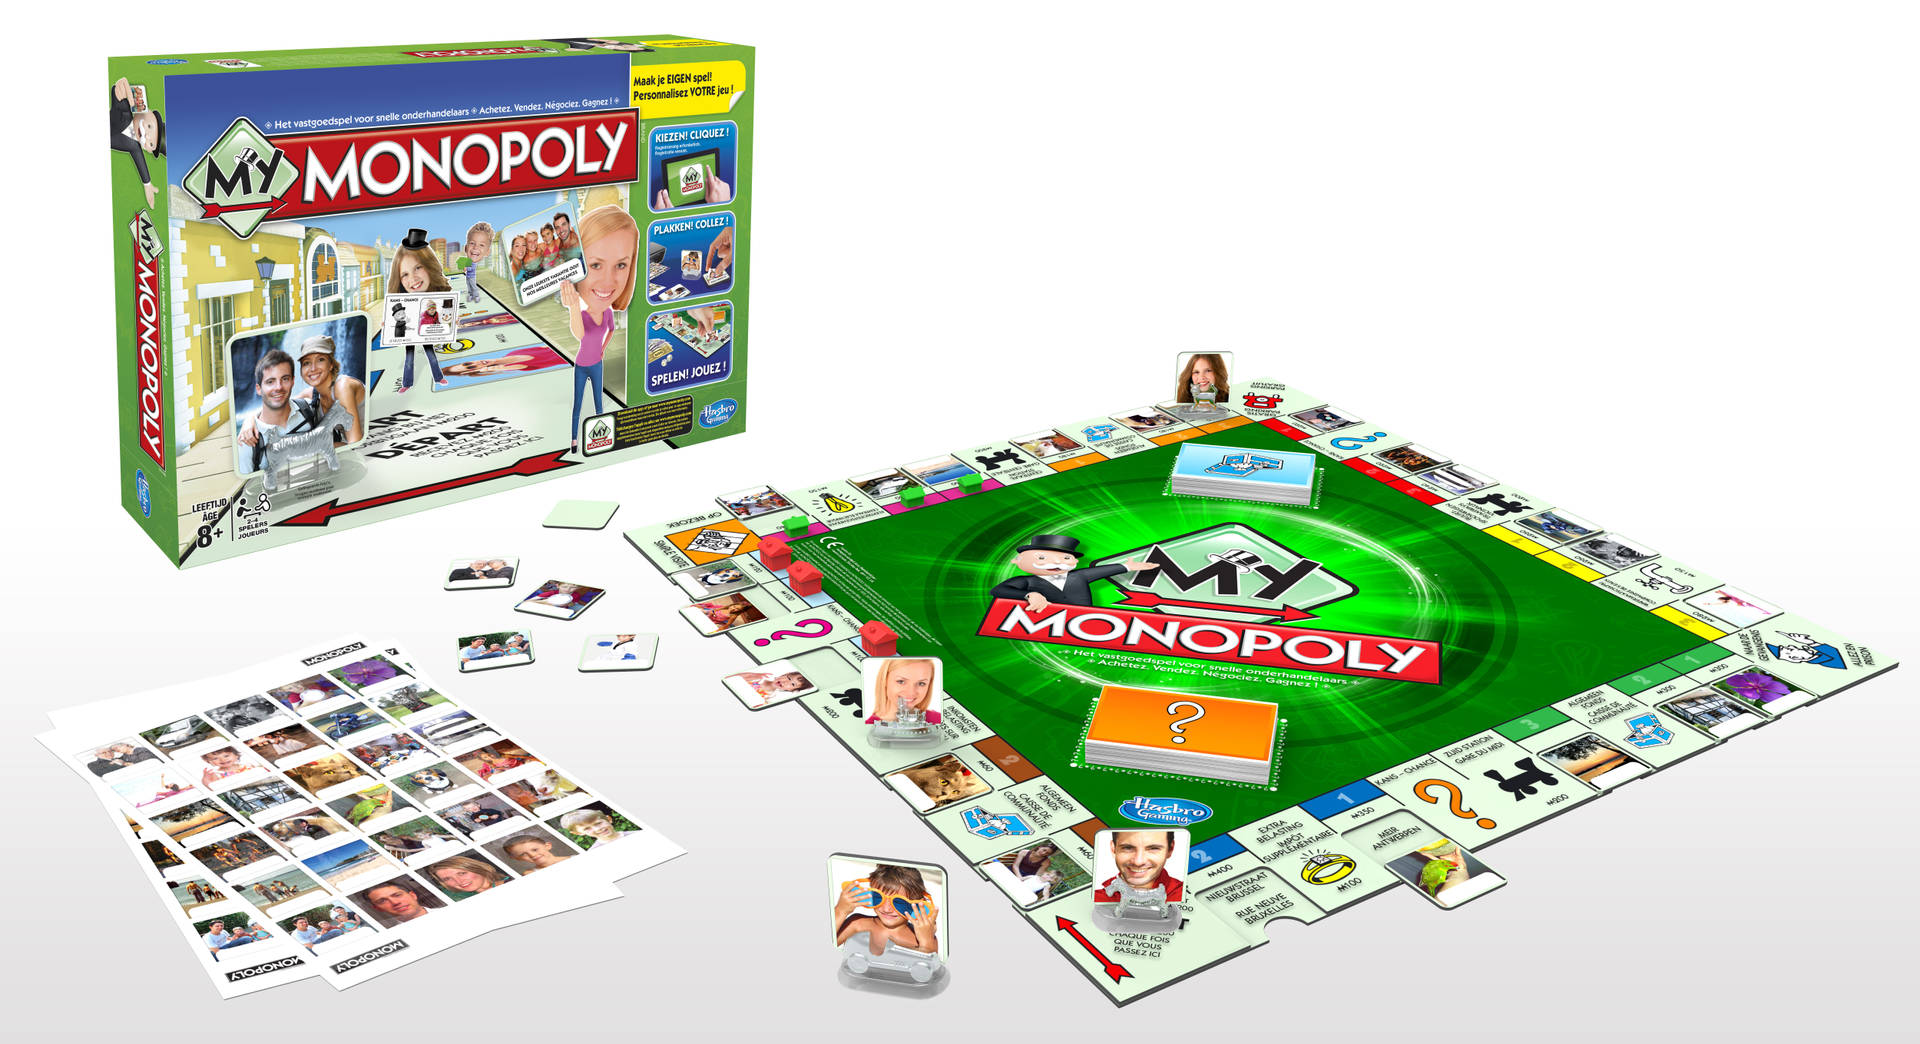 Monopoly Promotional Image Wallpaper